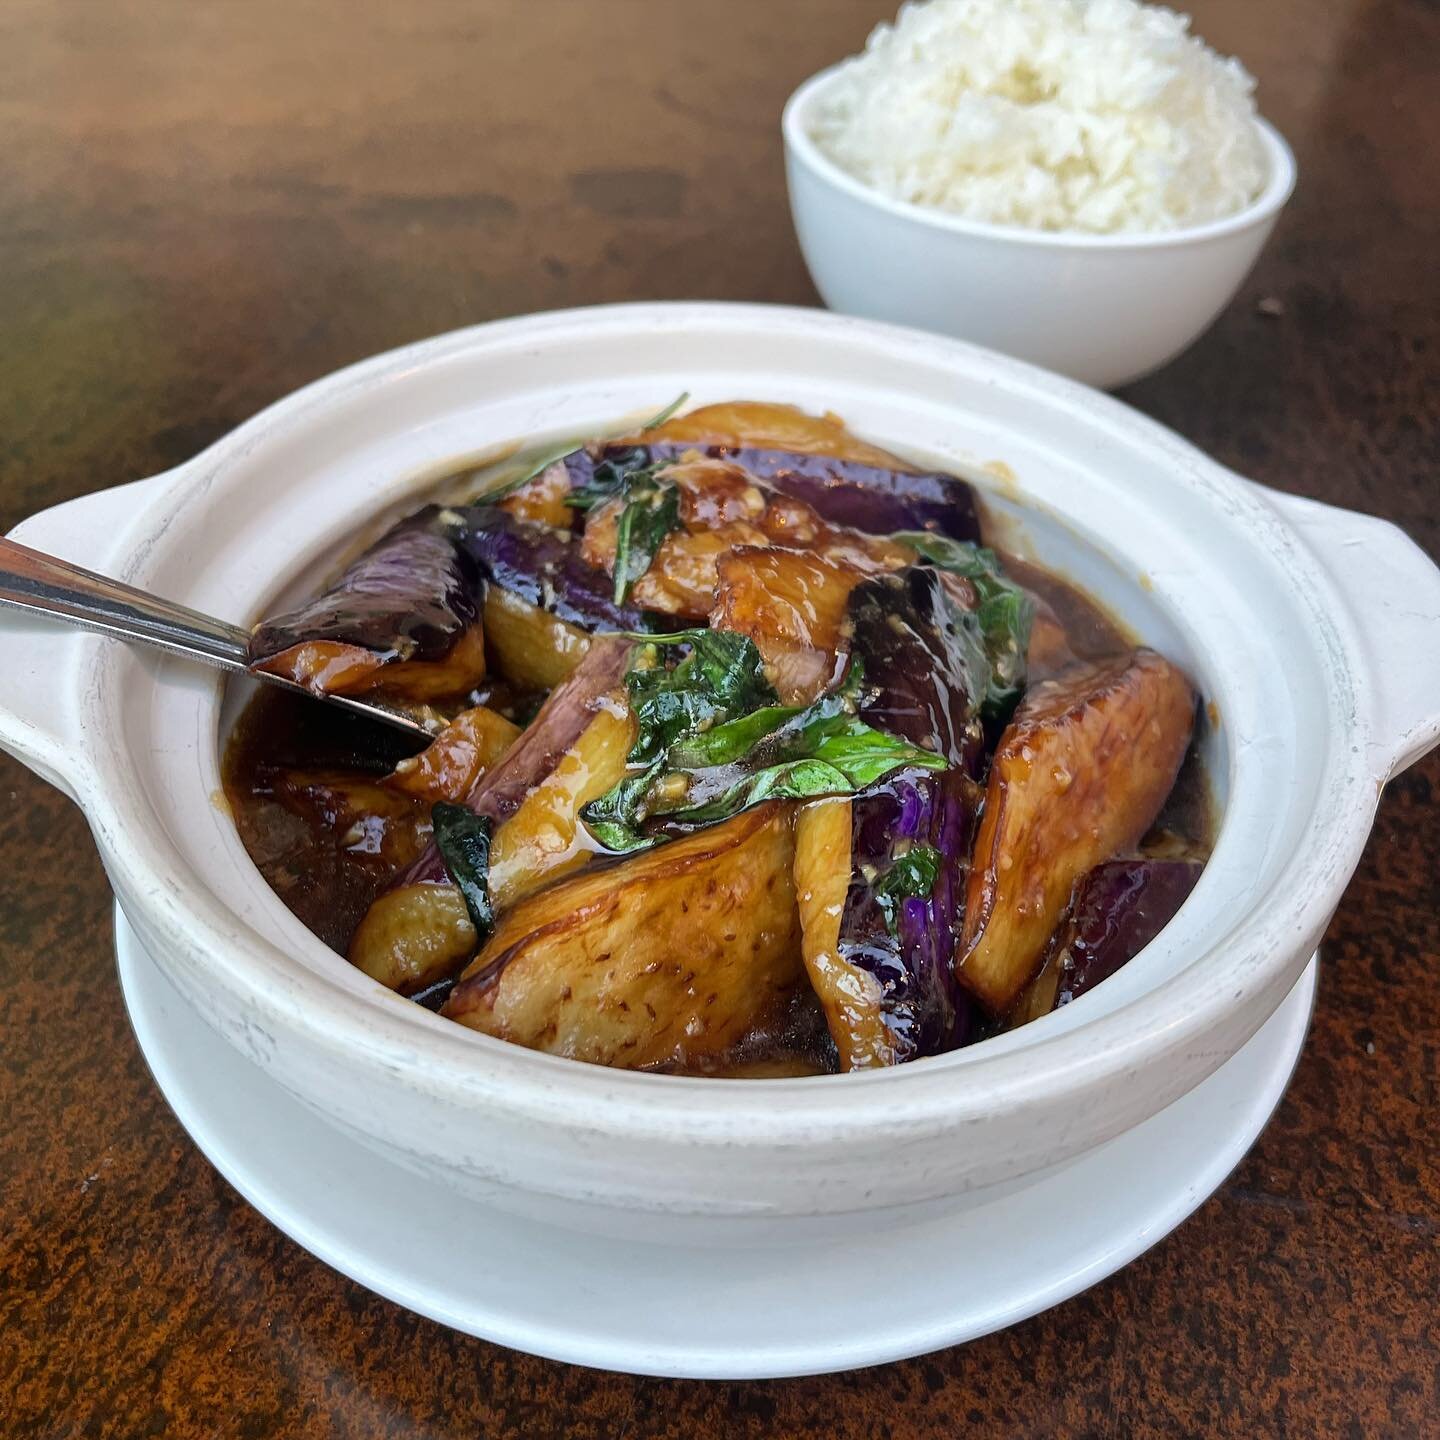 &bull;Wok Tossed Basil Eggplant&bull; 

All my 🍆 fans rejoice, the ultimate dish is waiting for you at our DTLA location! Tender pieces of eggplant with Thai basil in a garlicky sauce.